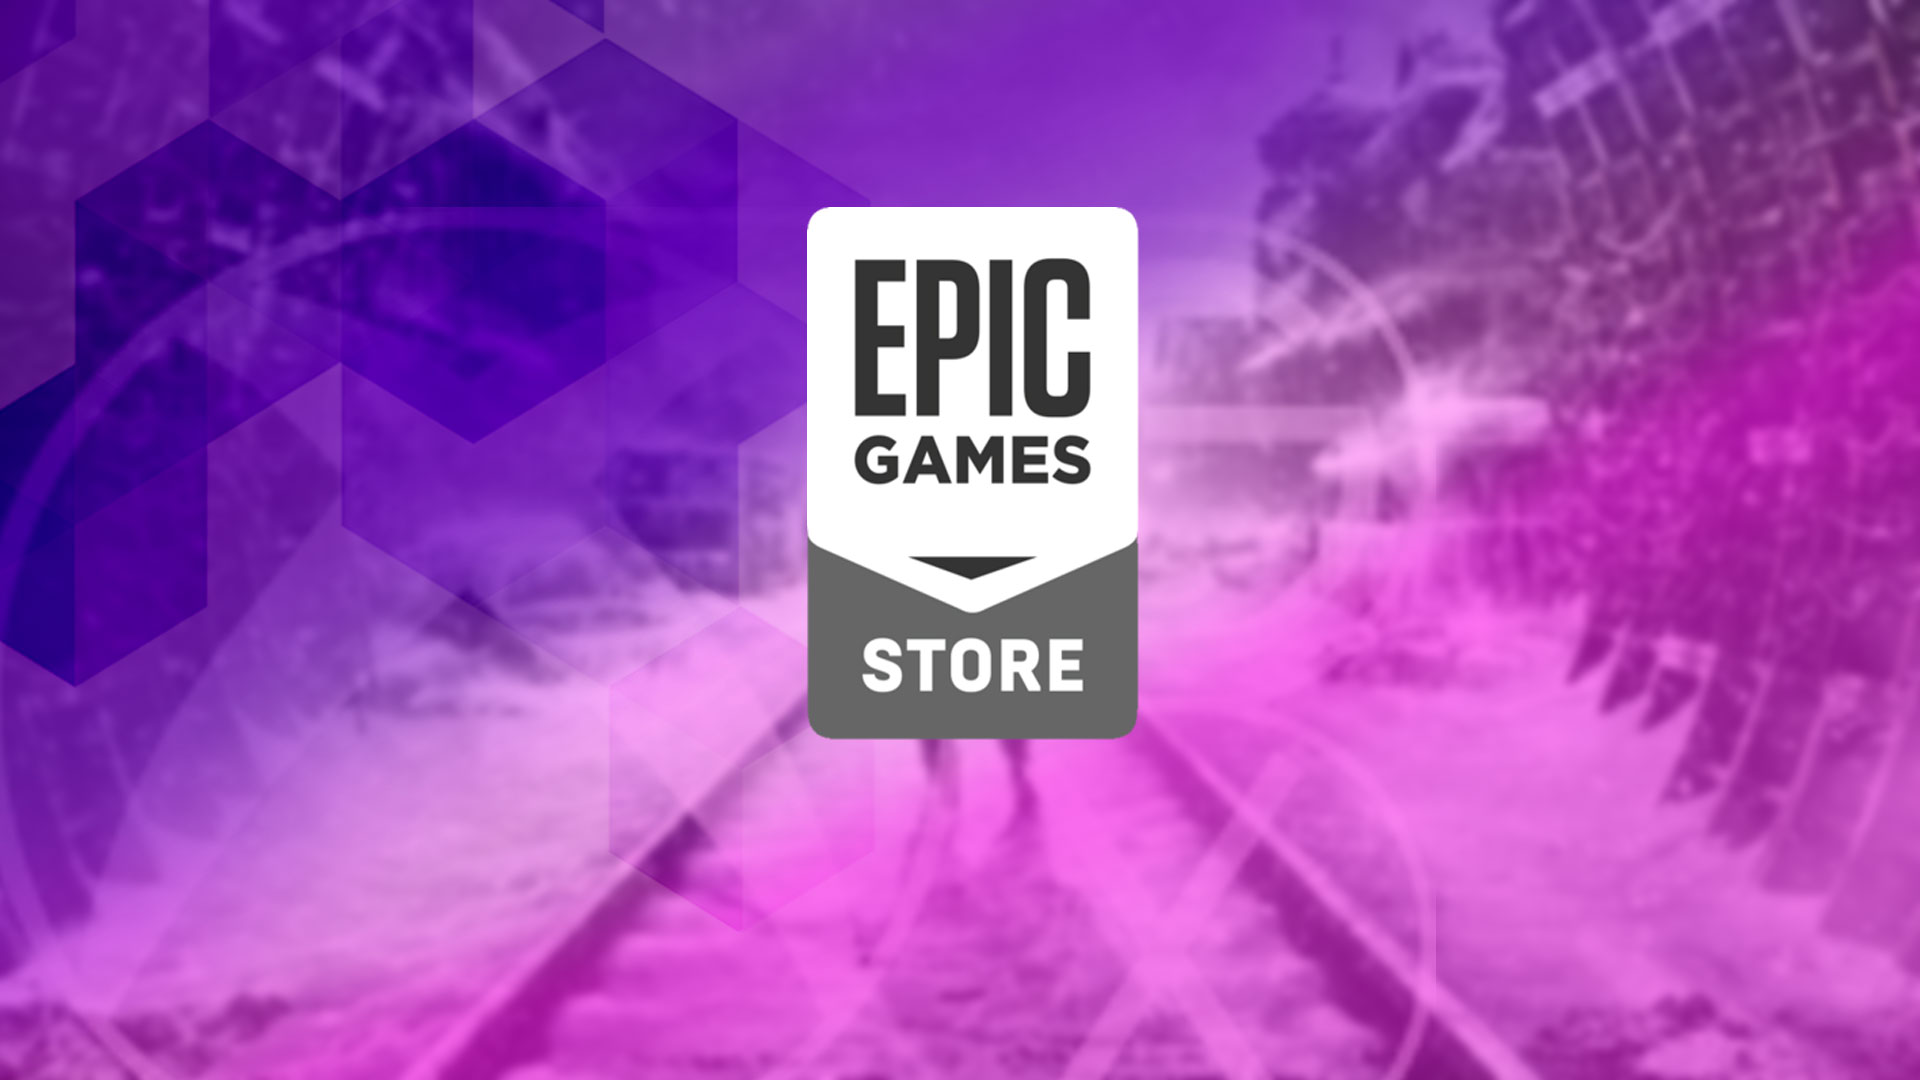 epic games, technology